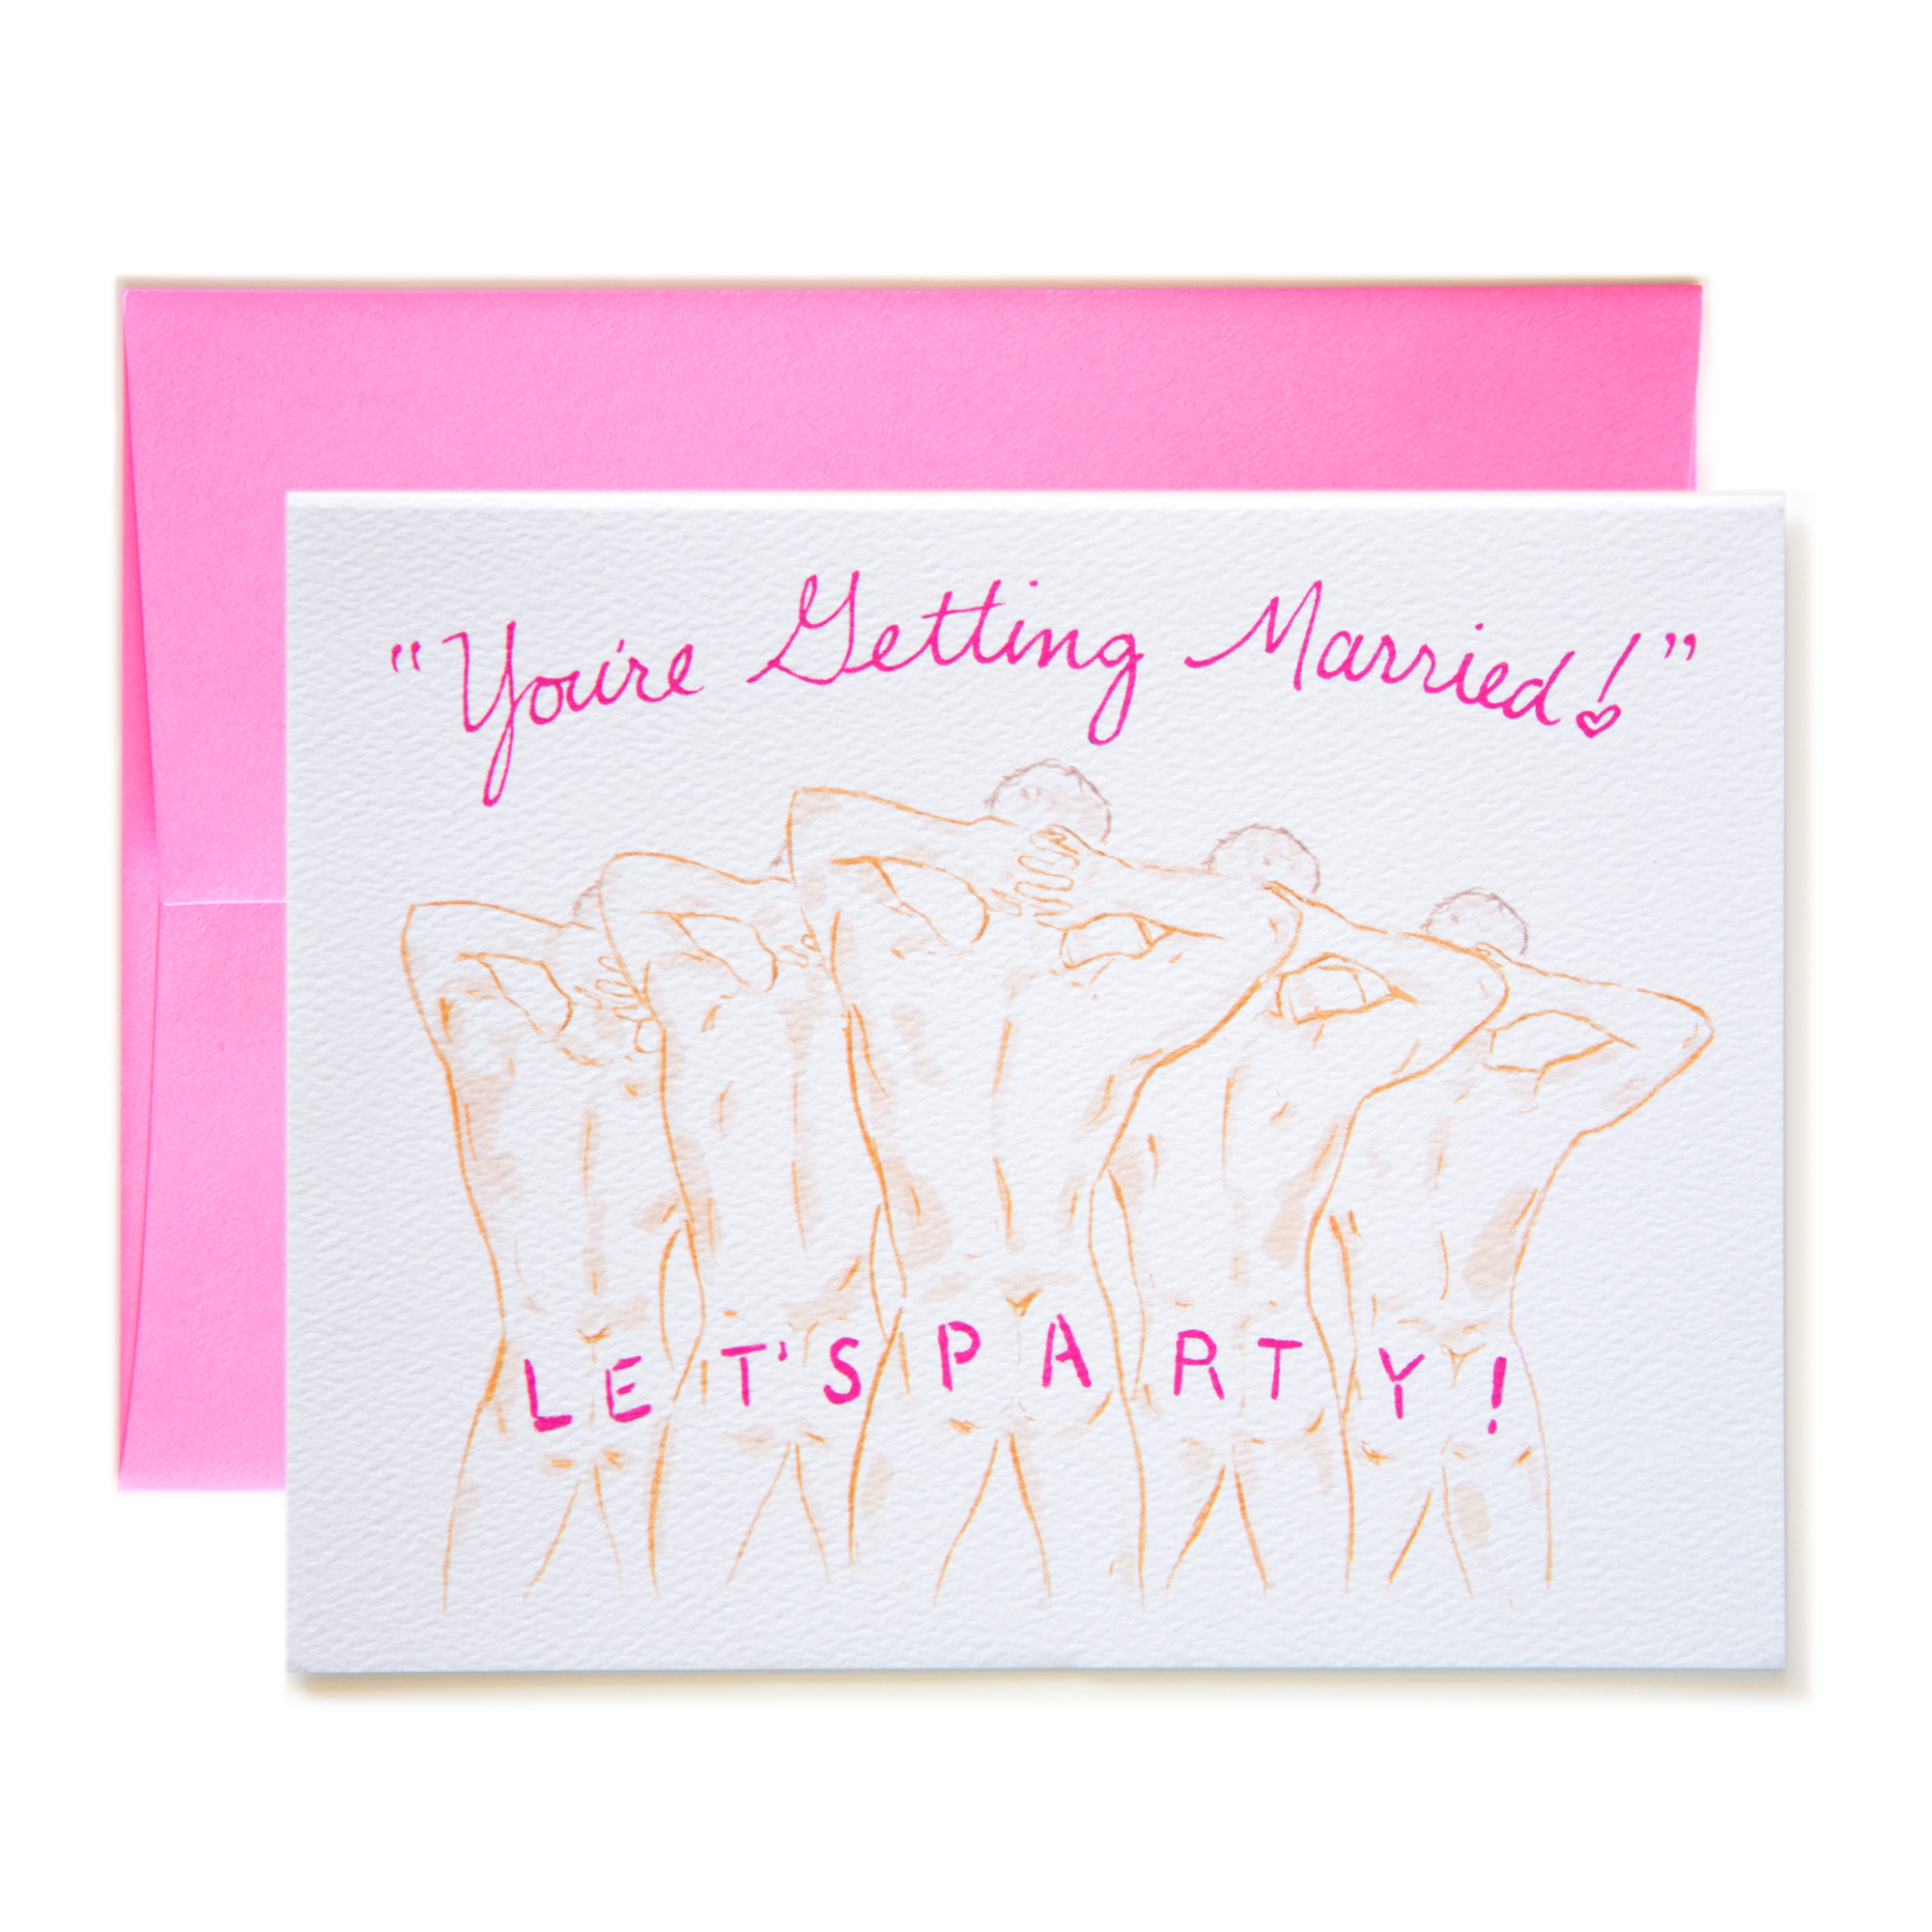 Getting Married Let's Party! Card